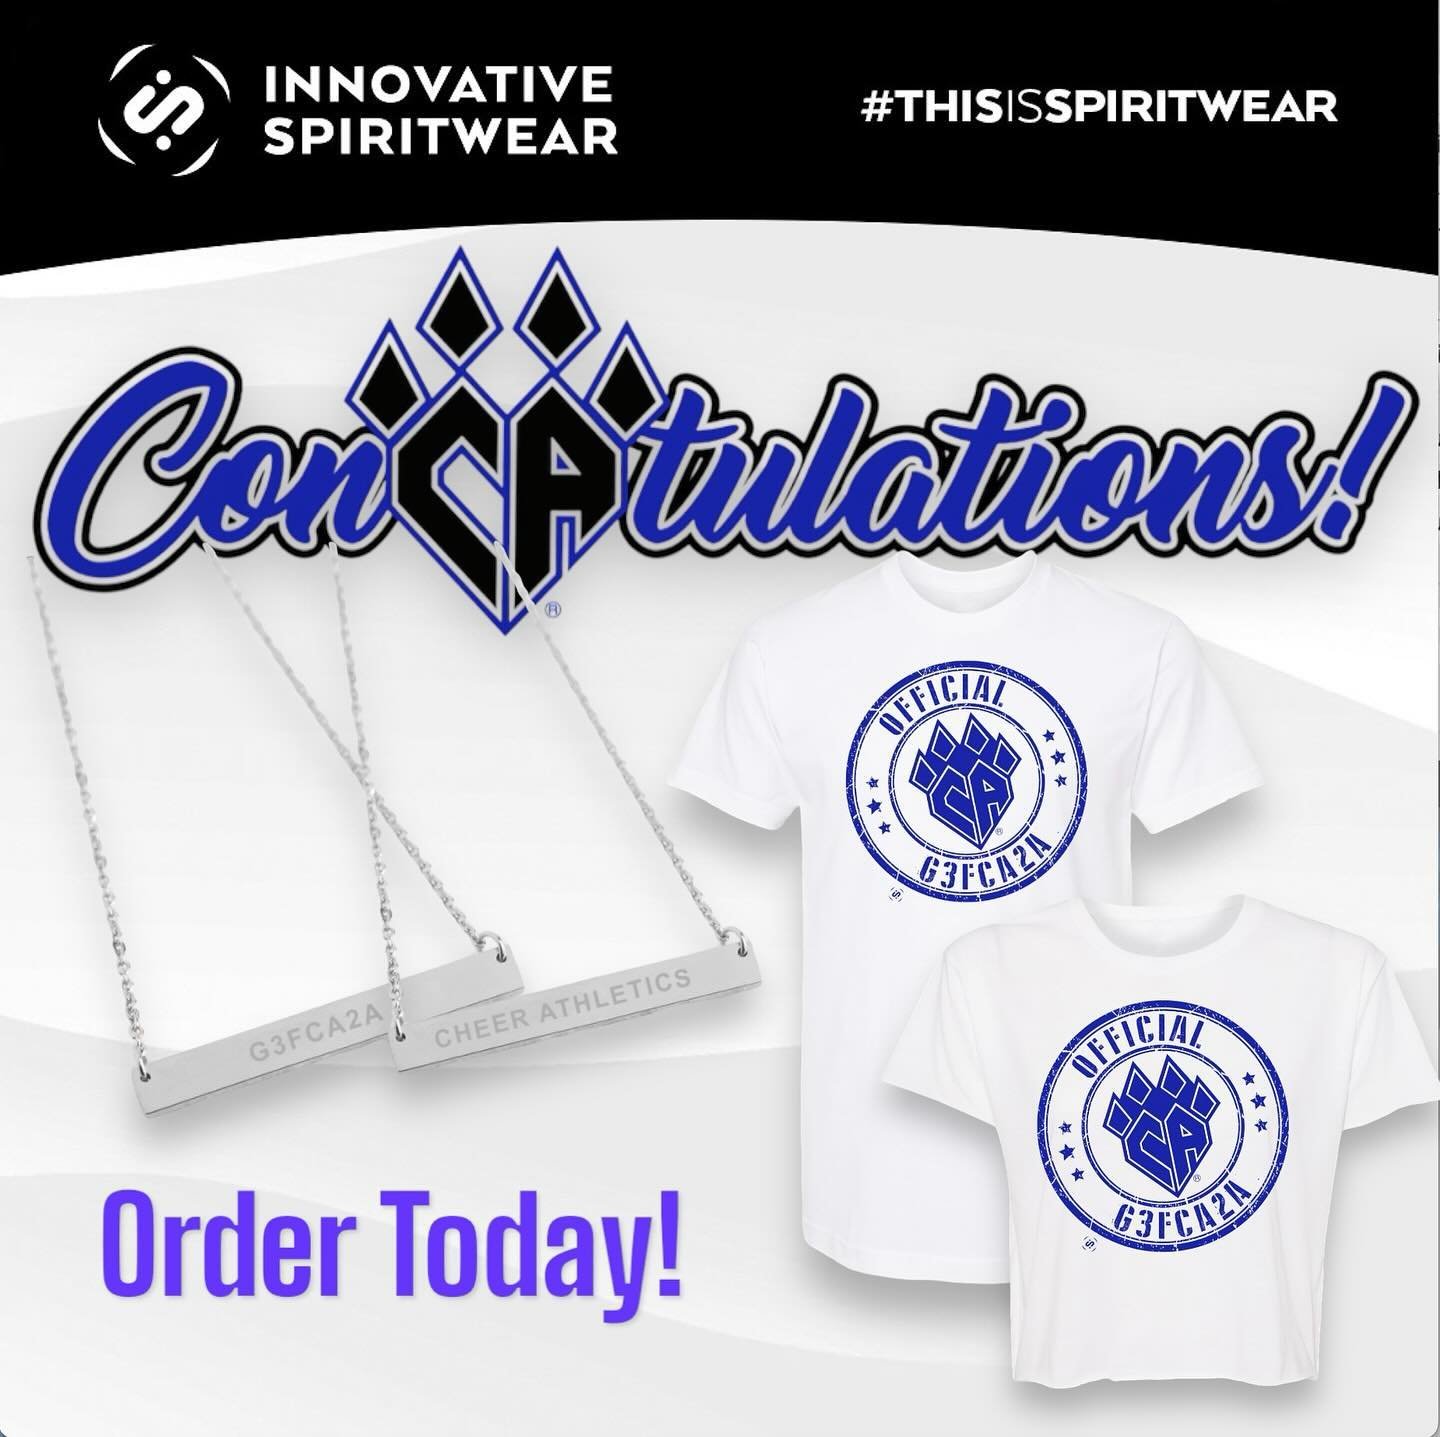 ConCATulations! To All The New Cats In Town!
Celebrate With An Exclusive, Limited Time Only Necklace Or G3FCA2A &ldquo;Official&rdquo; T-Shirt.

Shop Now!
www.innovativespiritwear.com/cheer-athletics
*
*
*
#thisISspiritwear #thisISallstar #cheer #all